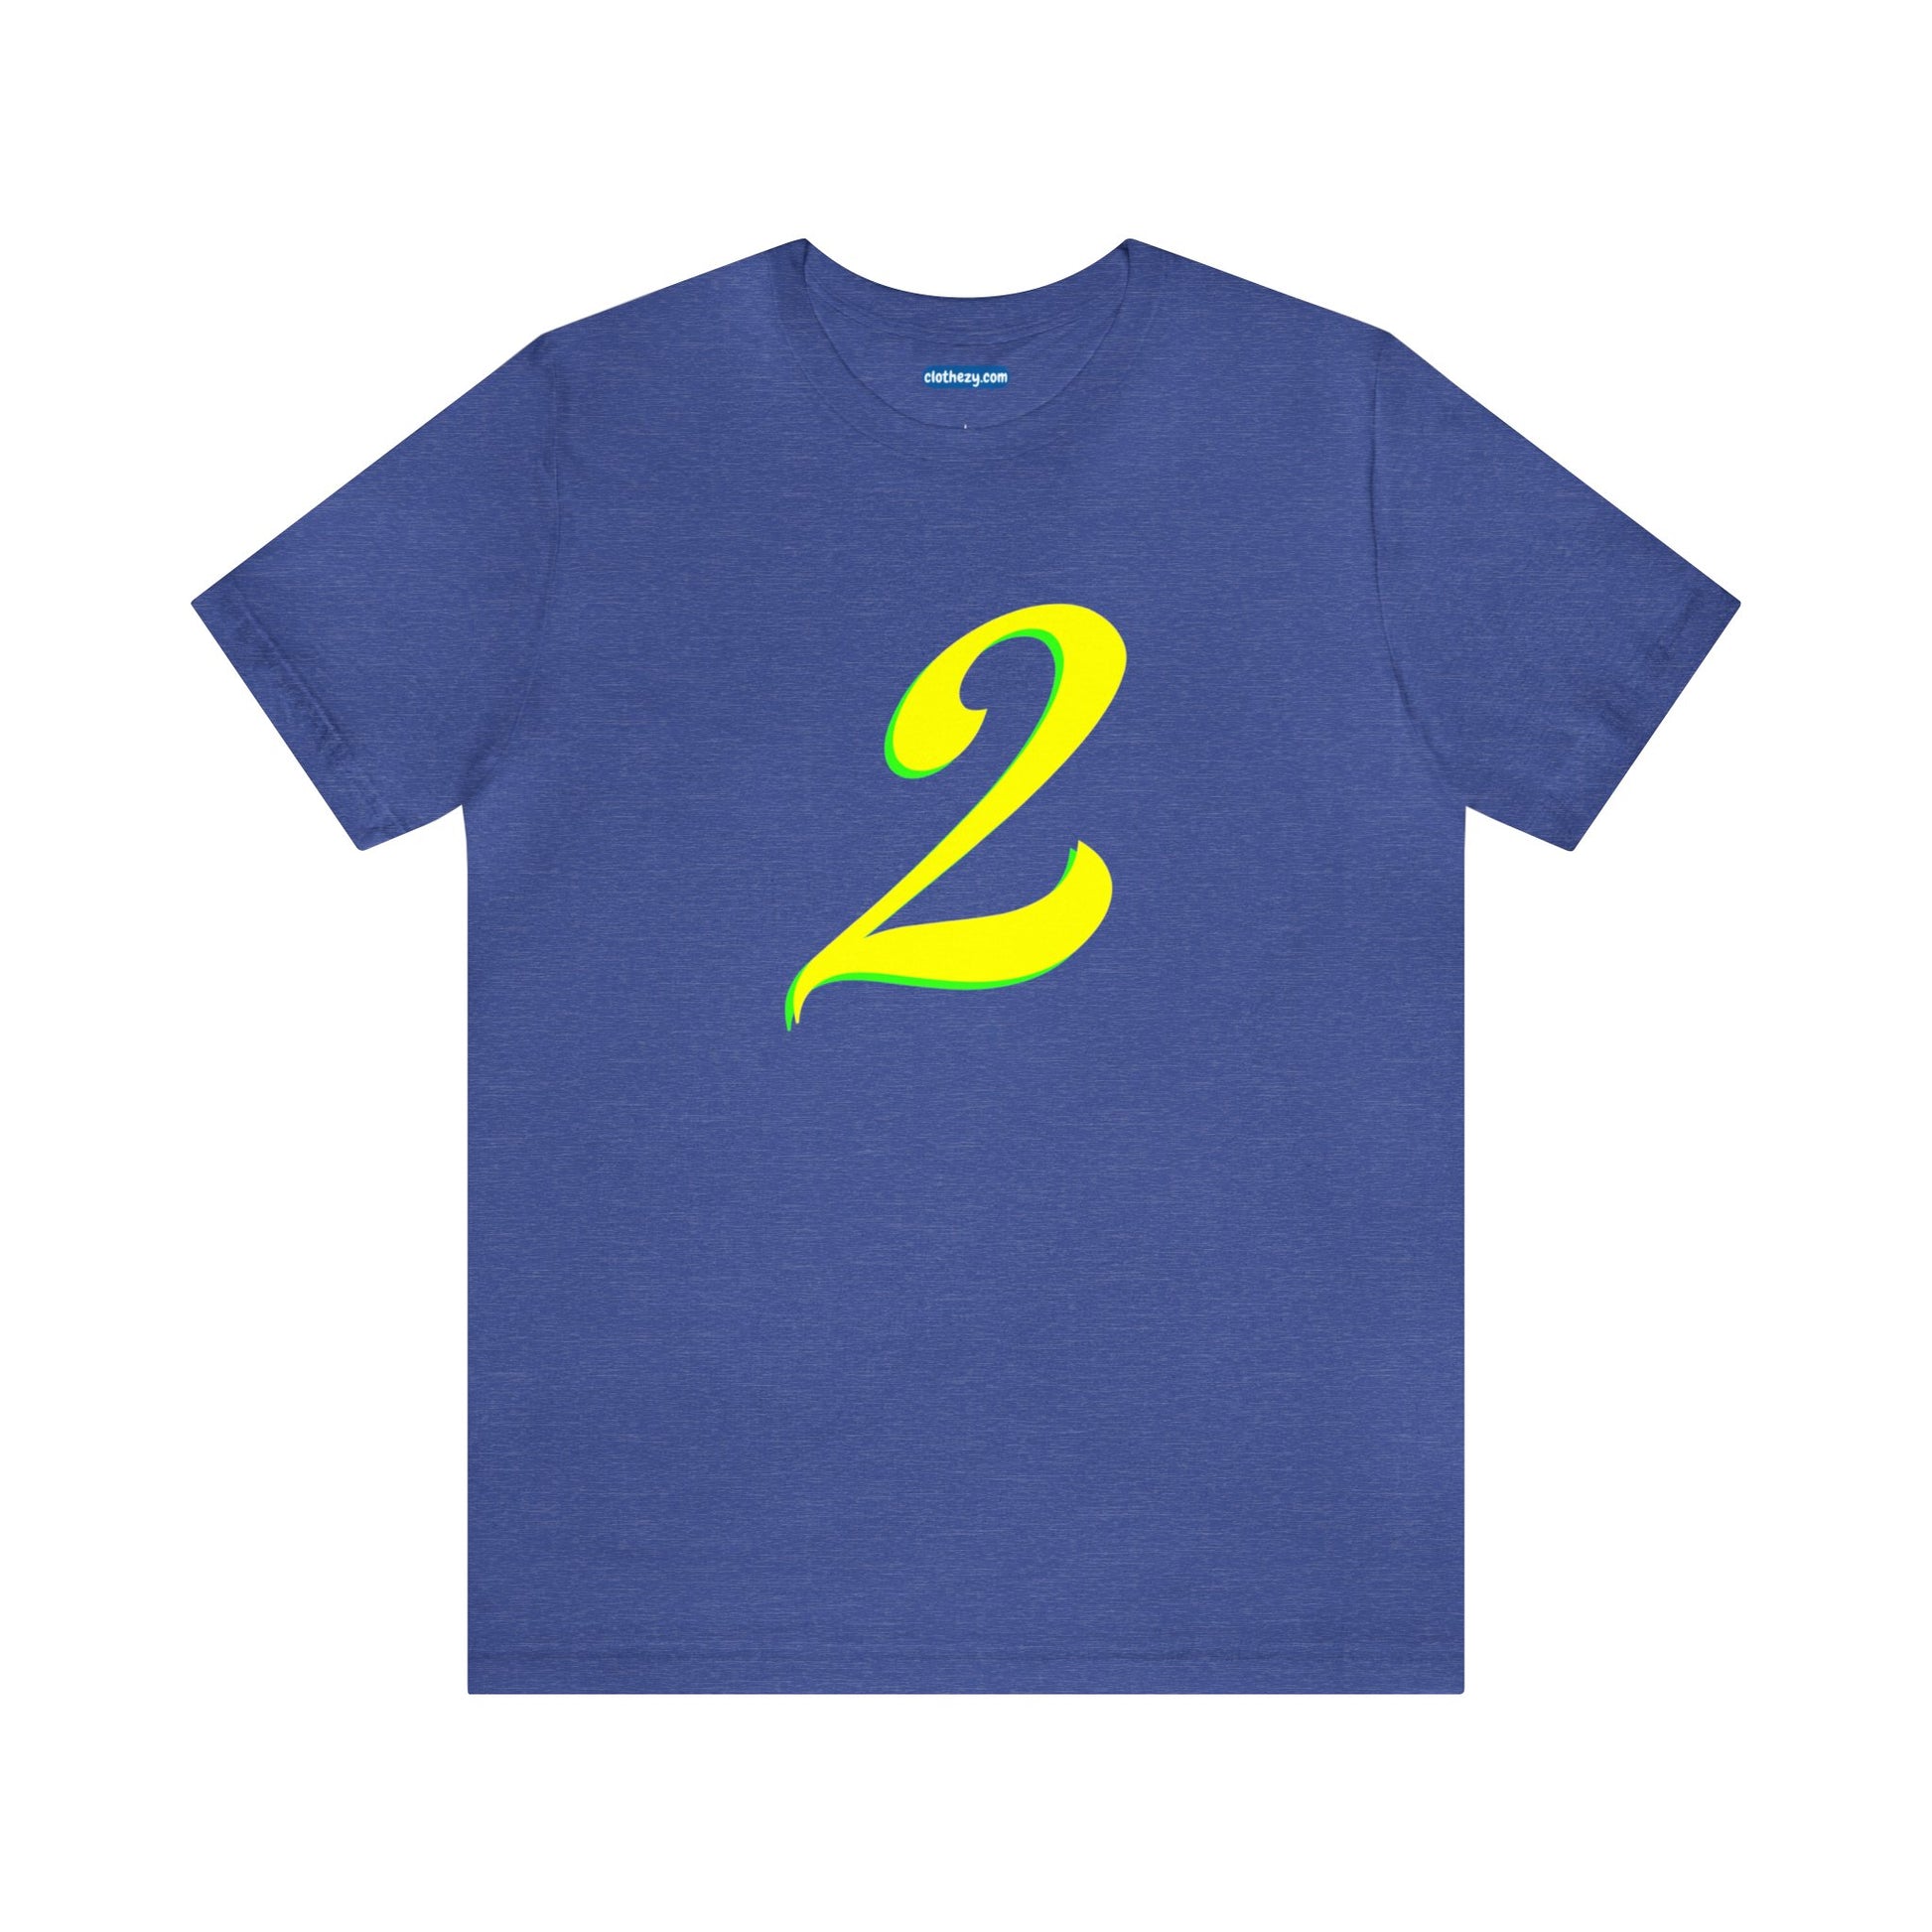 Number 2 Design - Soft Cotton Tee for birthdays and celebrations, Gift for friends and family, Multiple Options by clothezy.com in Navy Size Small - Buy Now